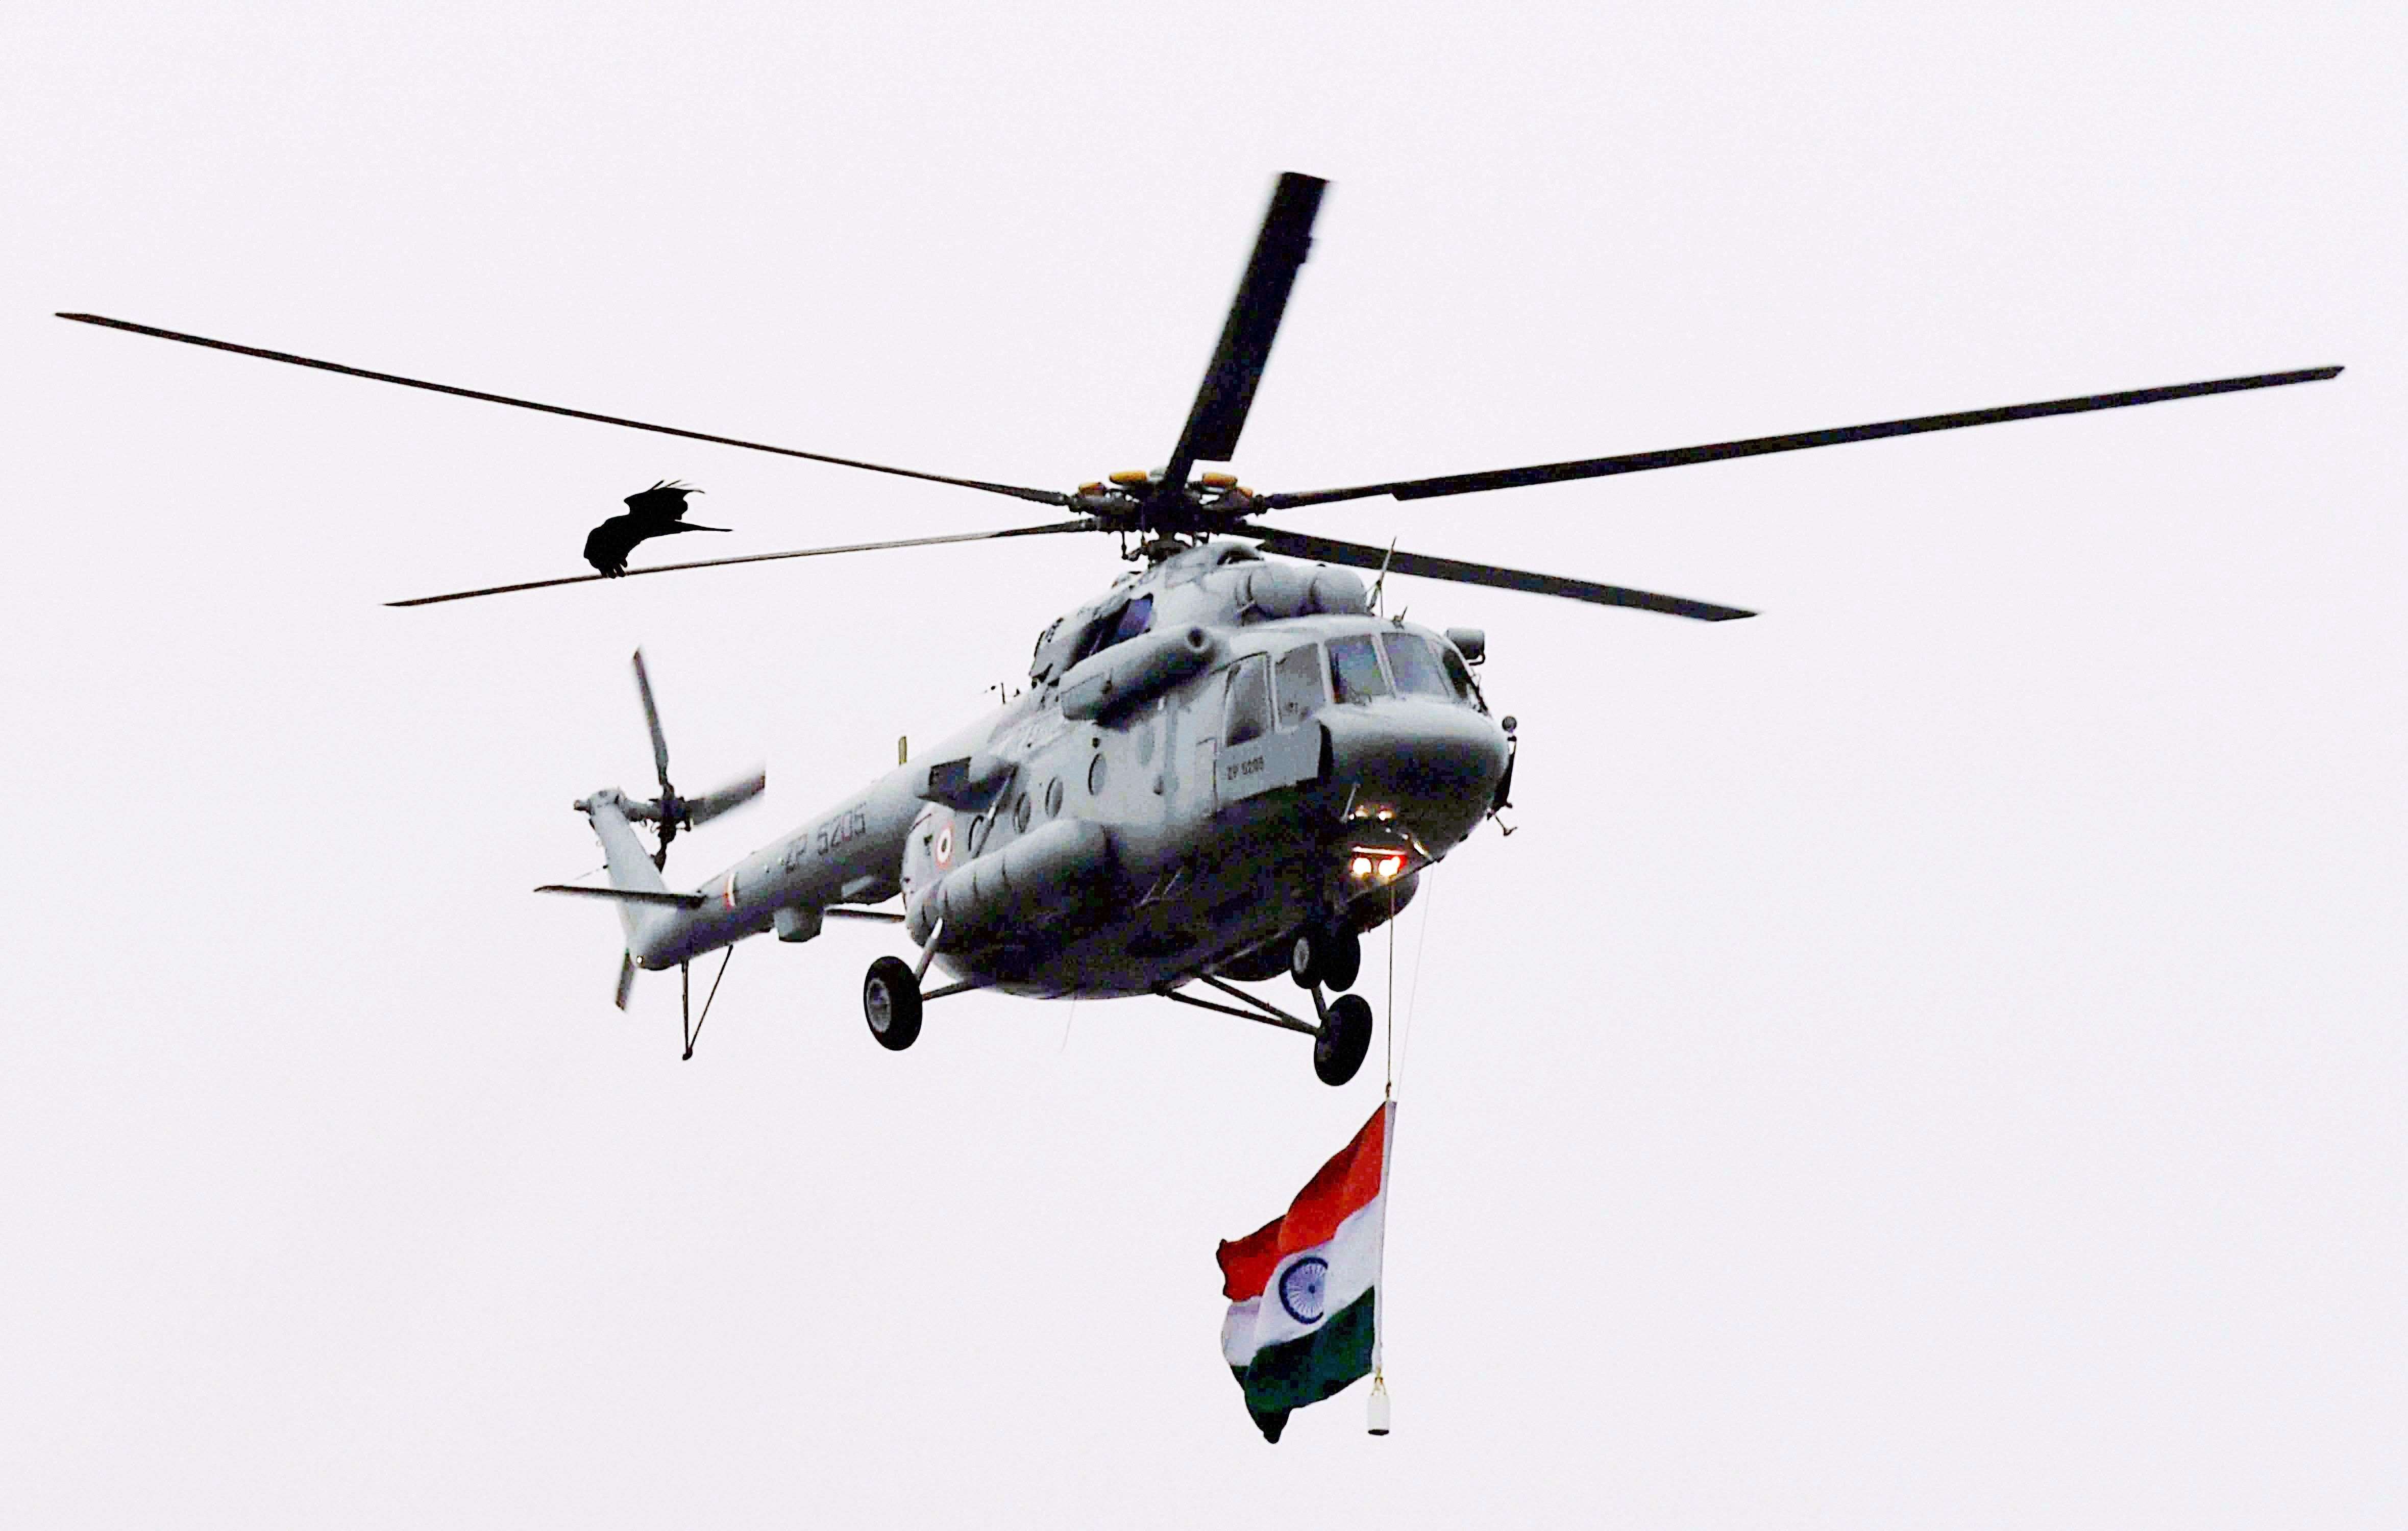 An Army helicopter fly past during the rehearsal for the Republic Day parade at Rajpath in New Delhi. (PTI photo by Atul Yadav)